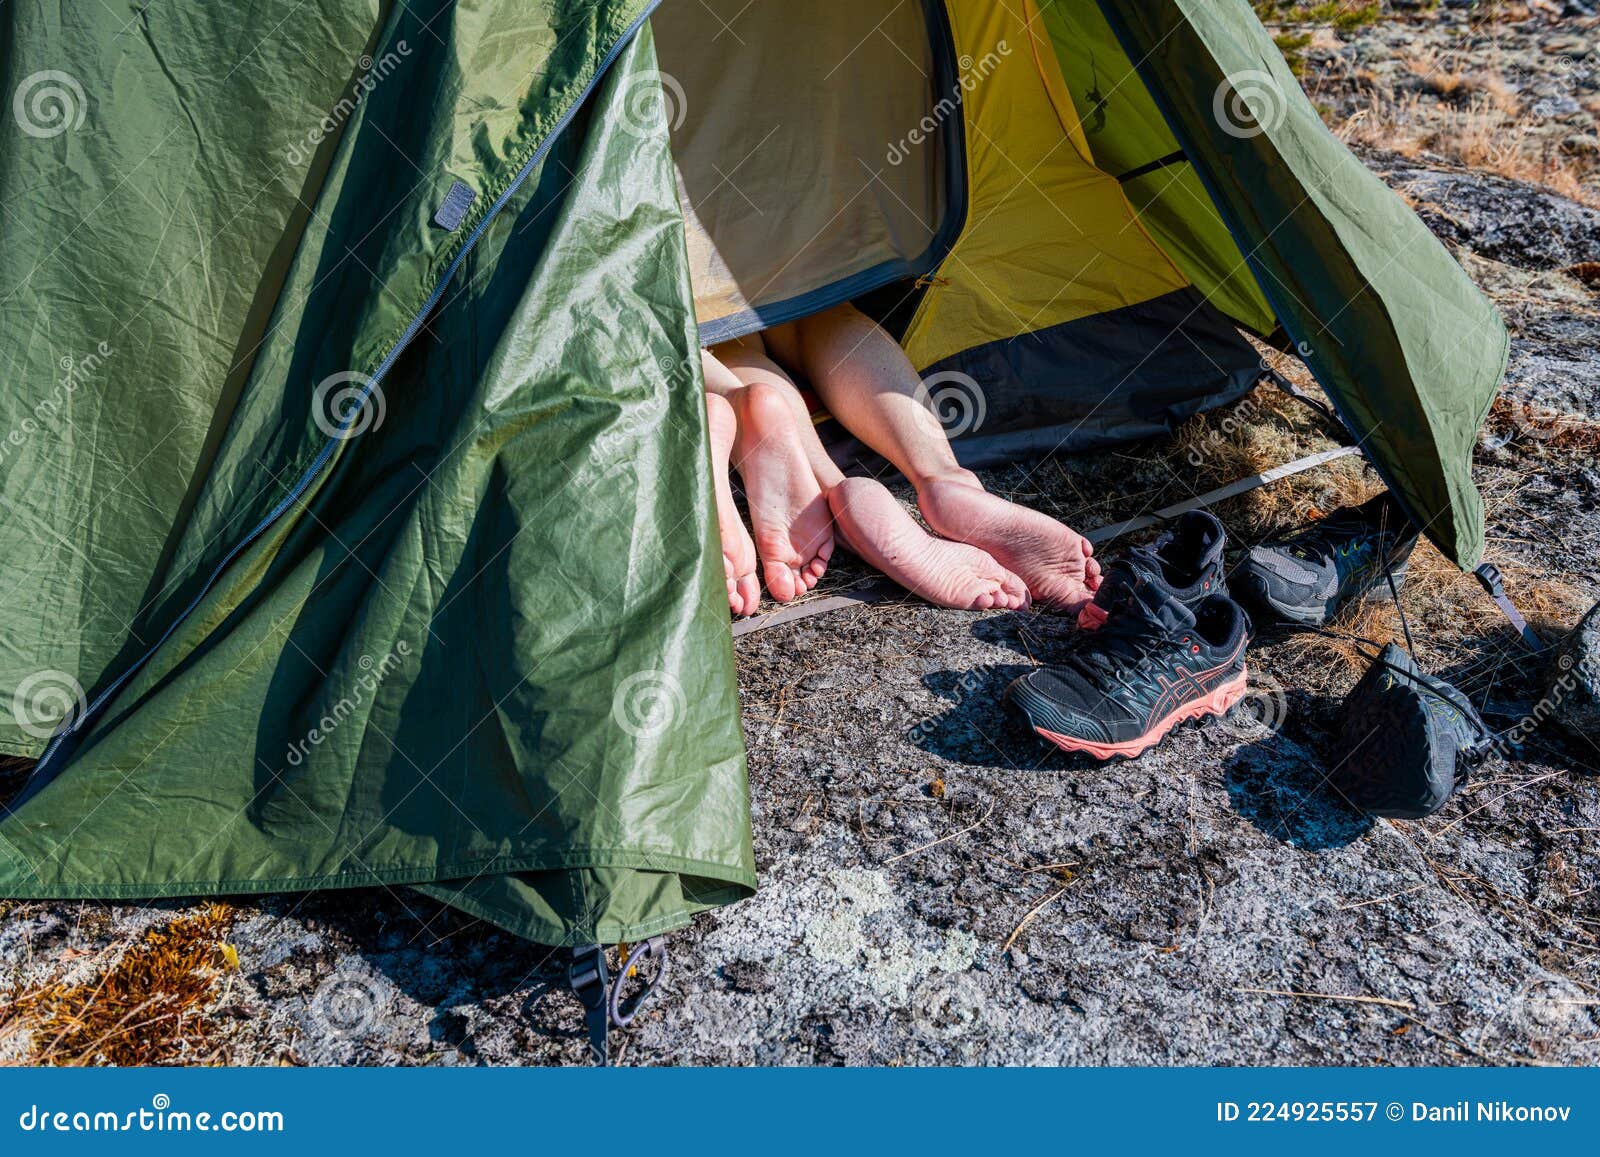 Passionate Couple Sleeping in a Tent. Young Lovers. People in Love. Erotic and Romance Moments on Nature pic